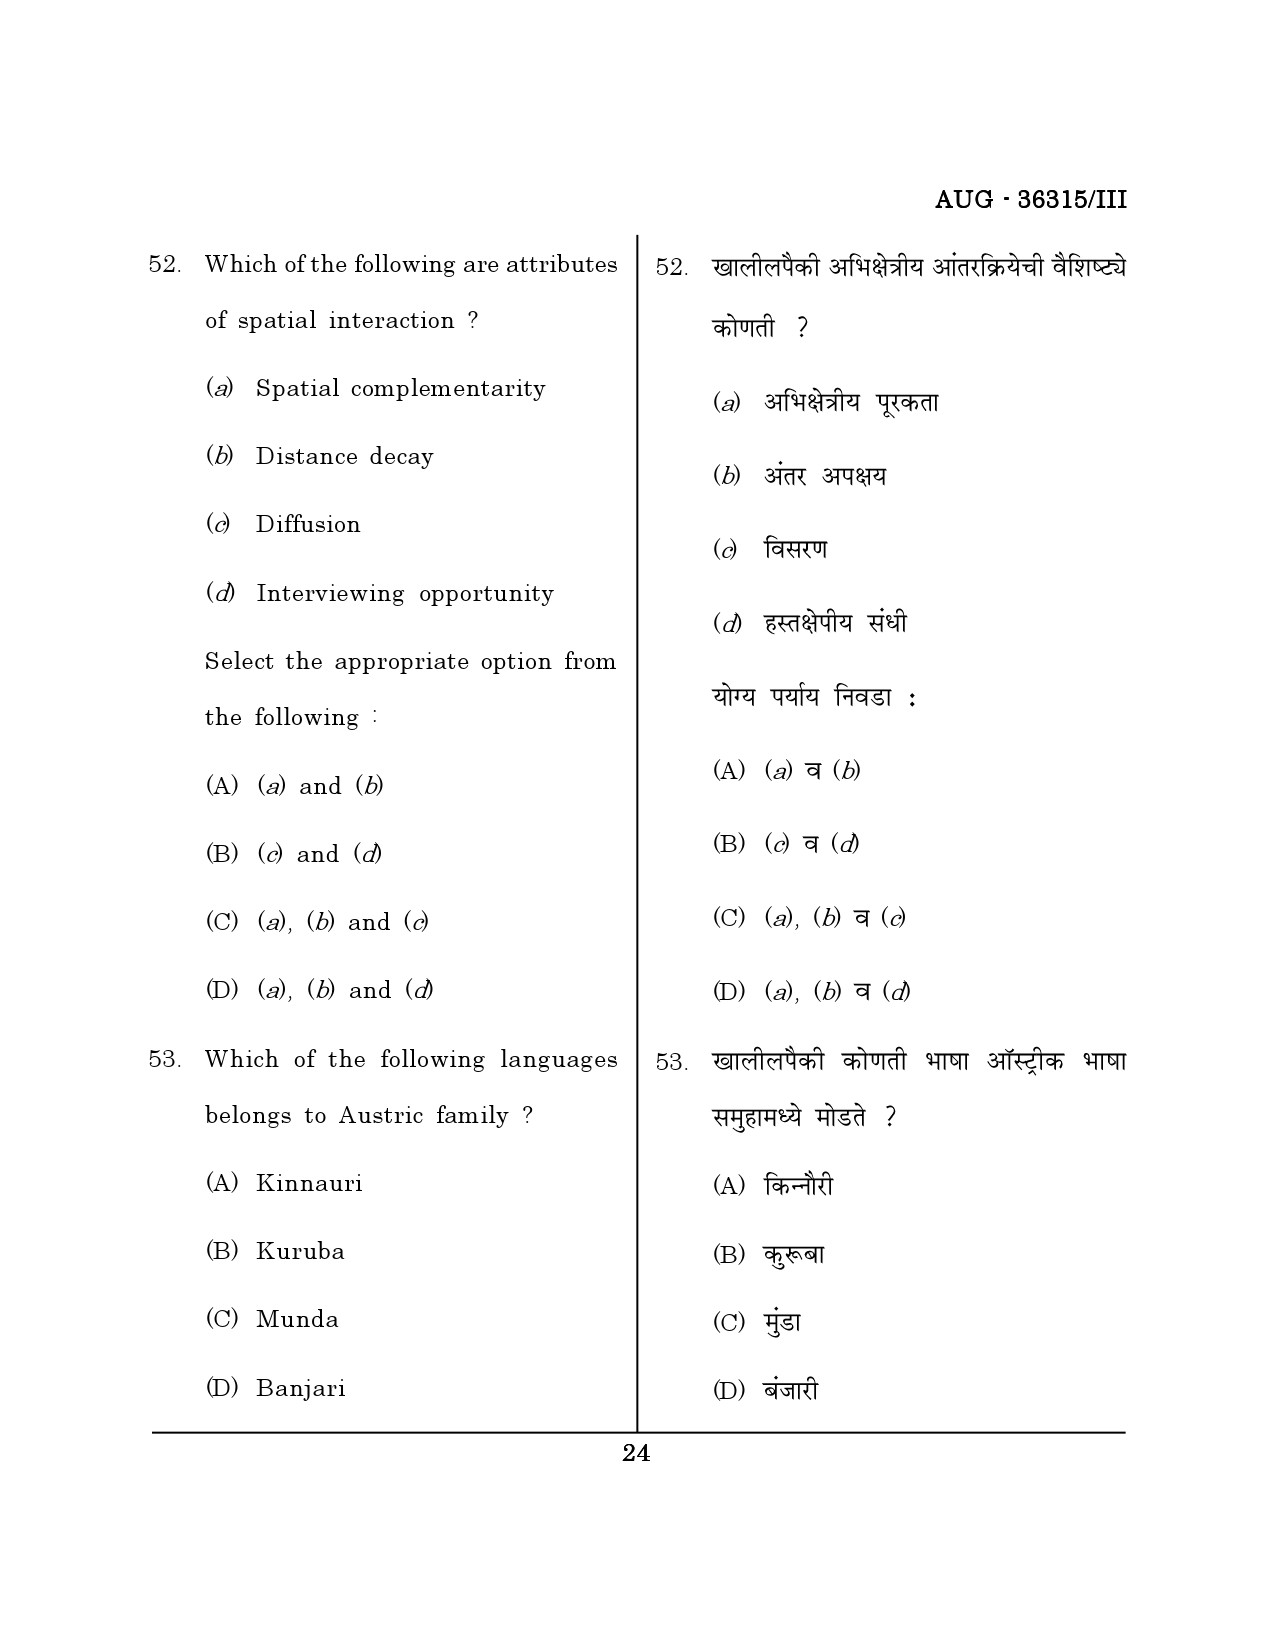 Maharashtra SET Geography Question Paper III August 2015 23